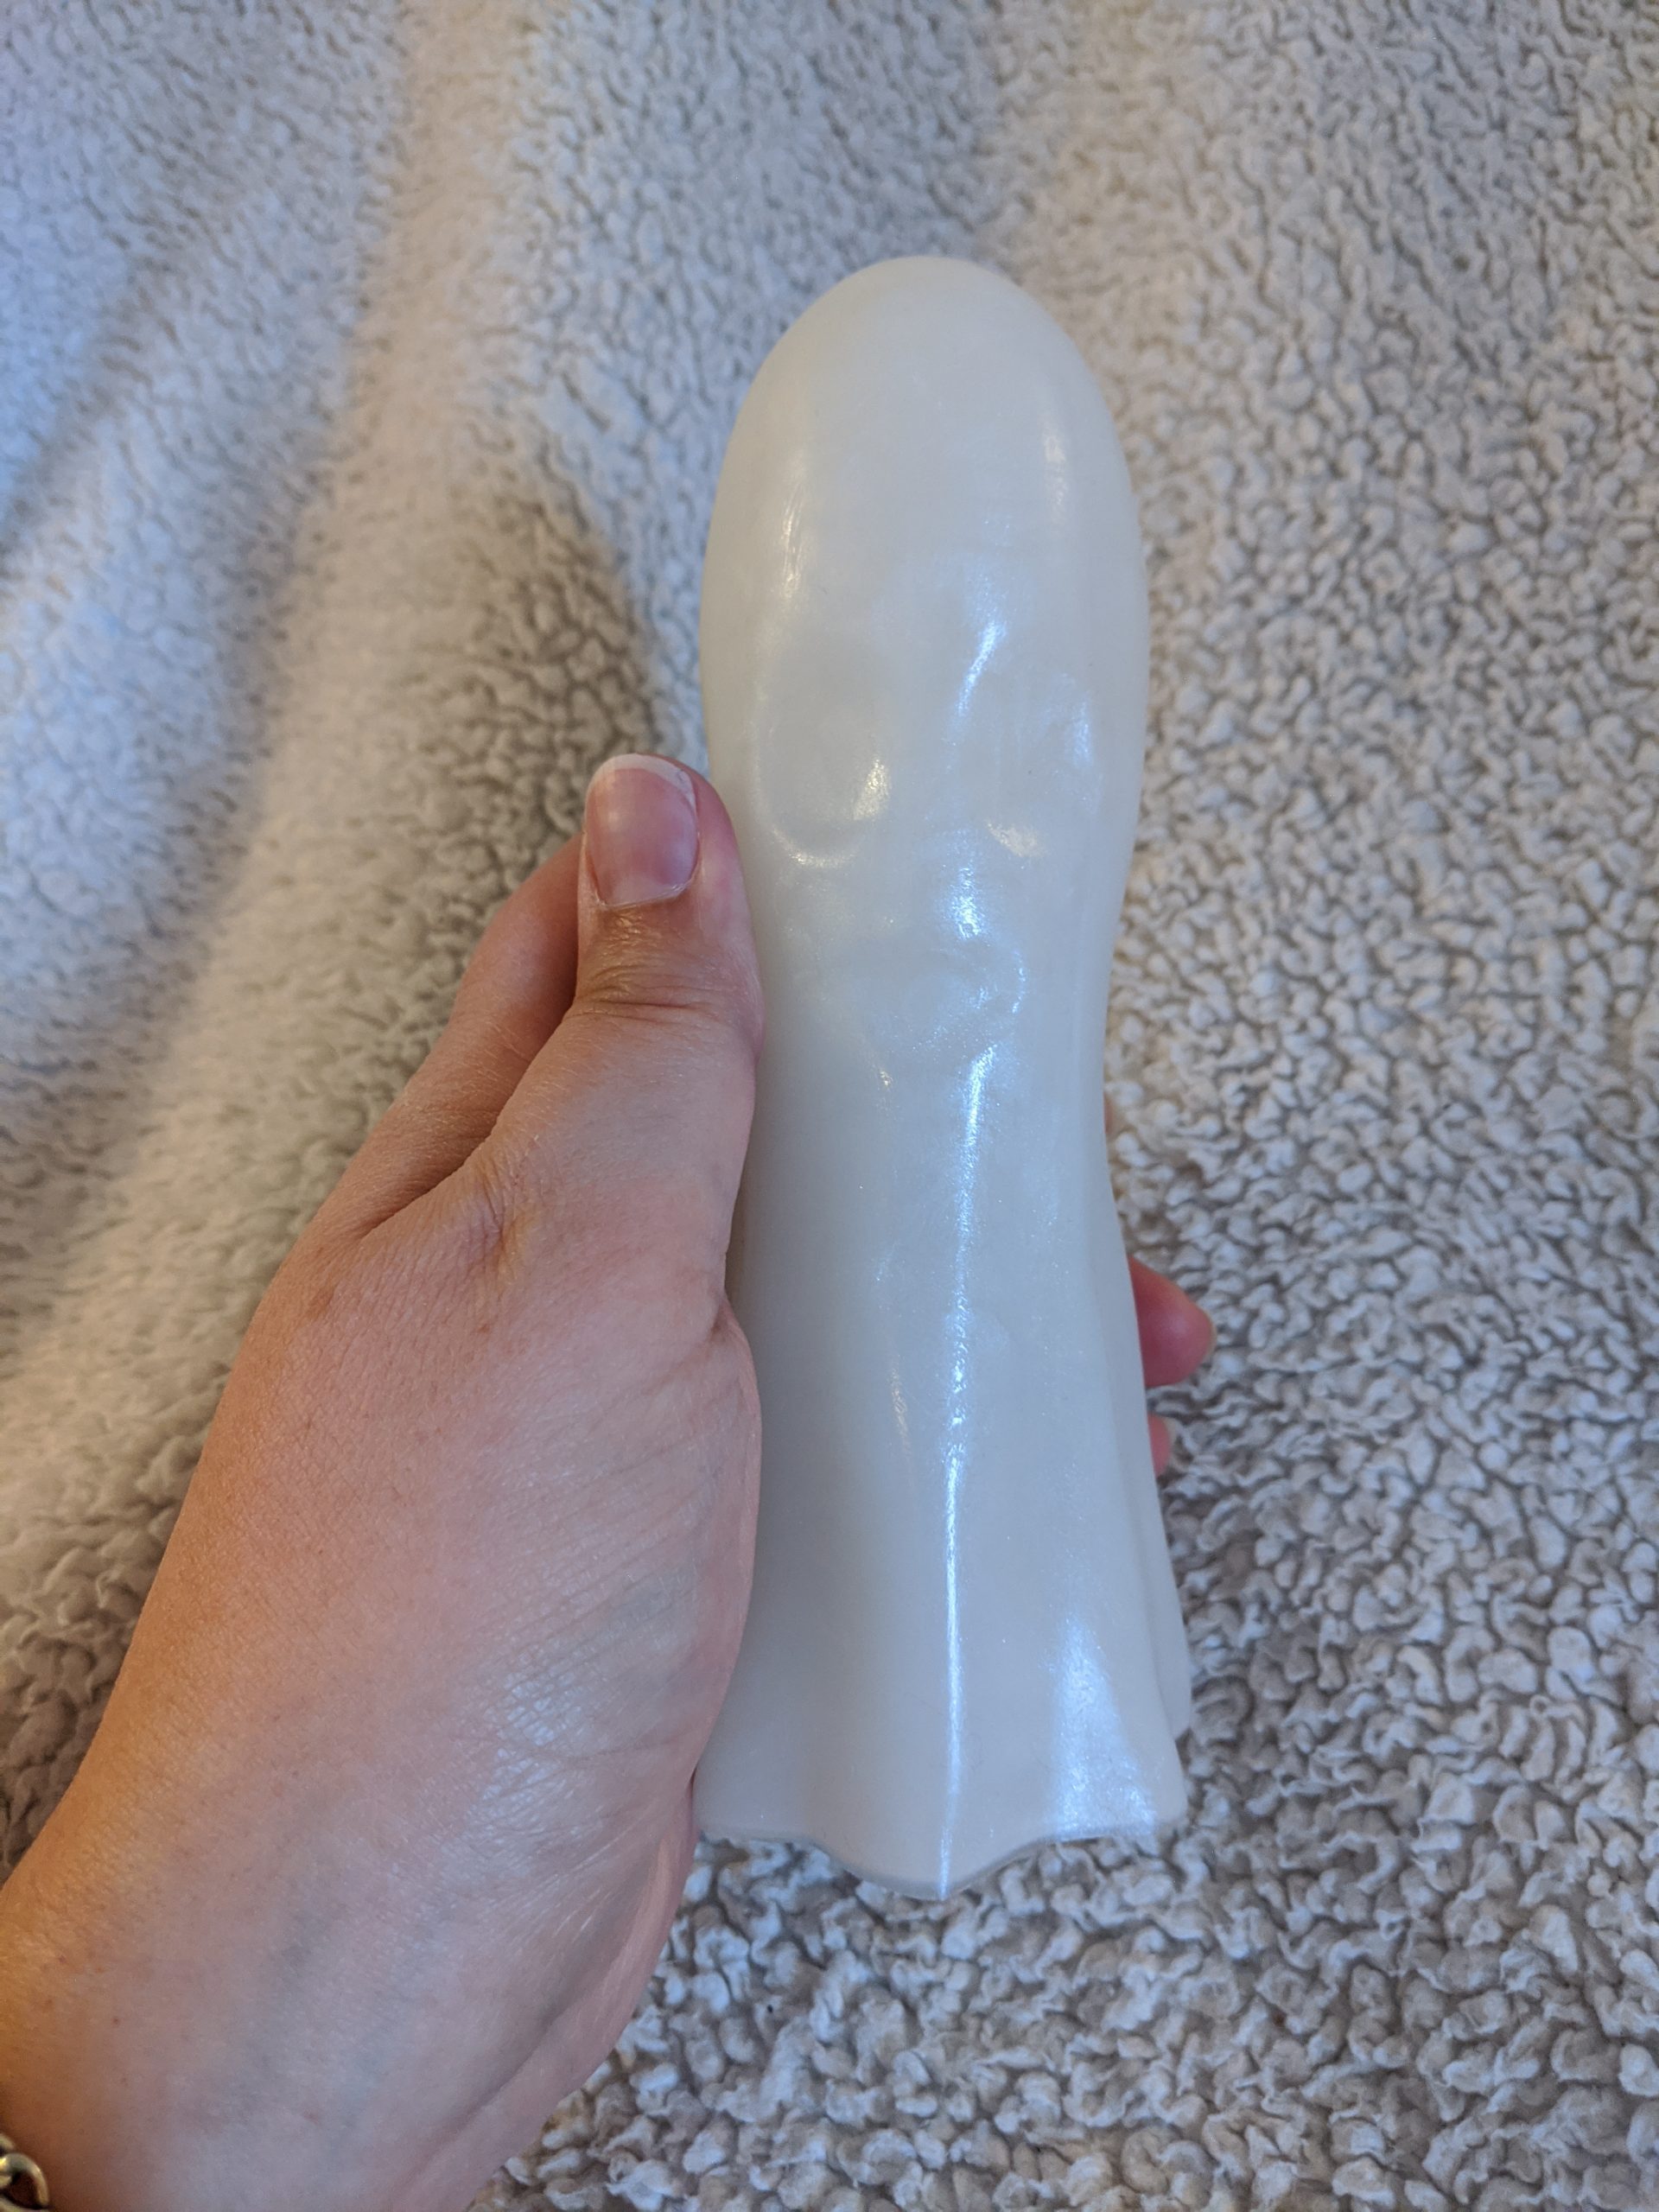 Ghost dildo with face